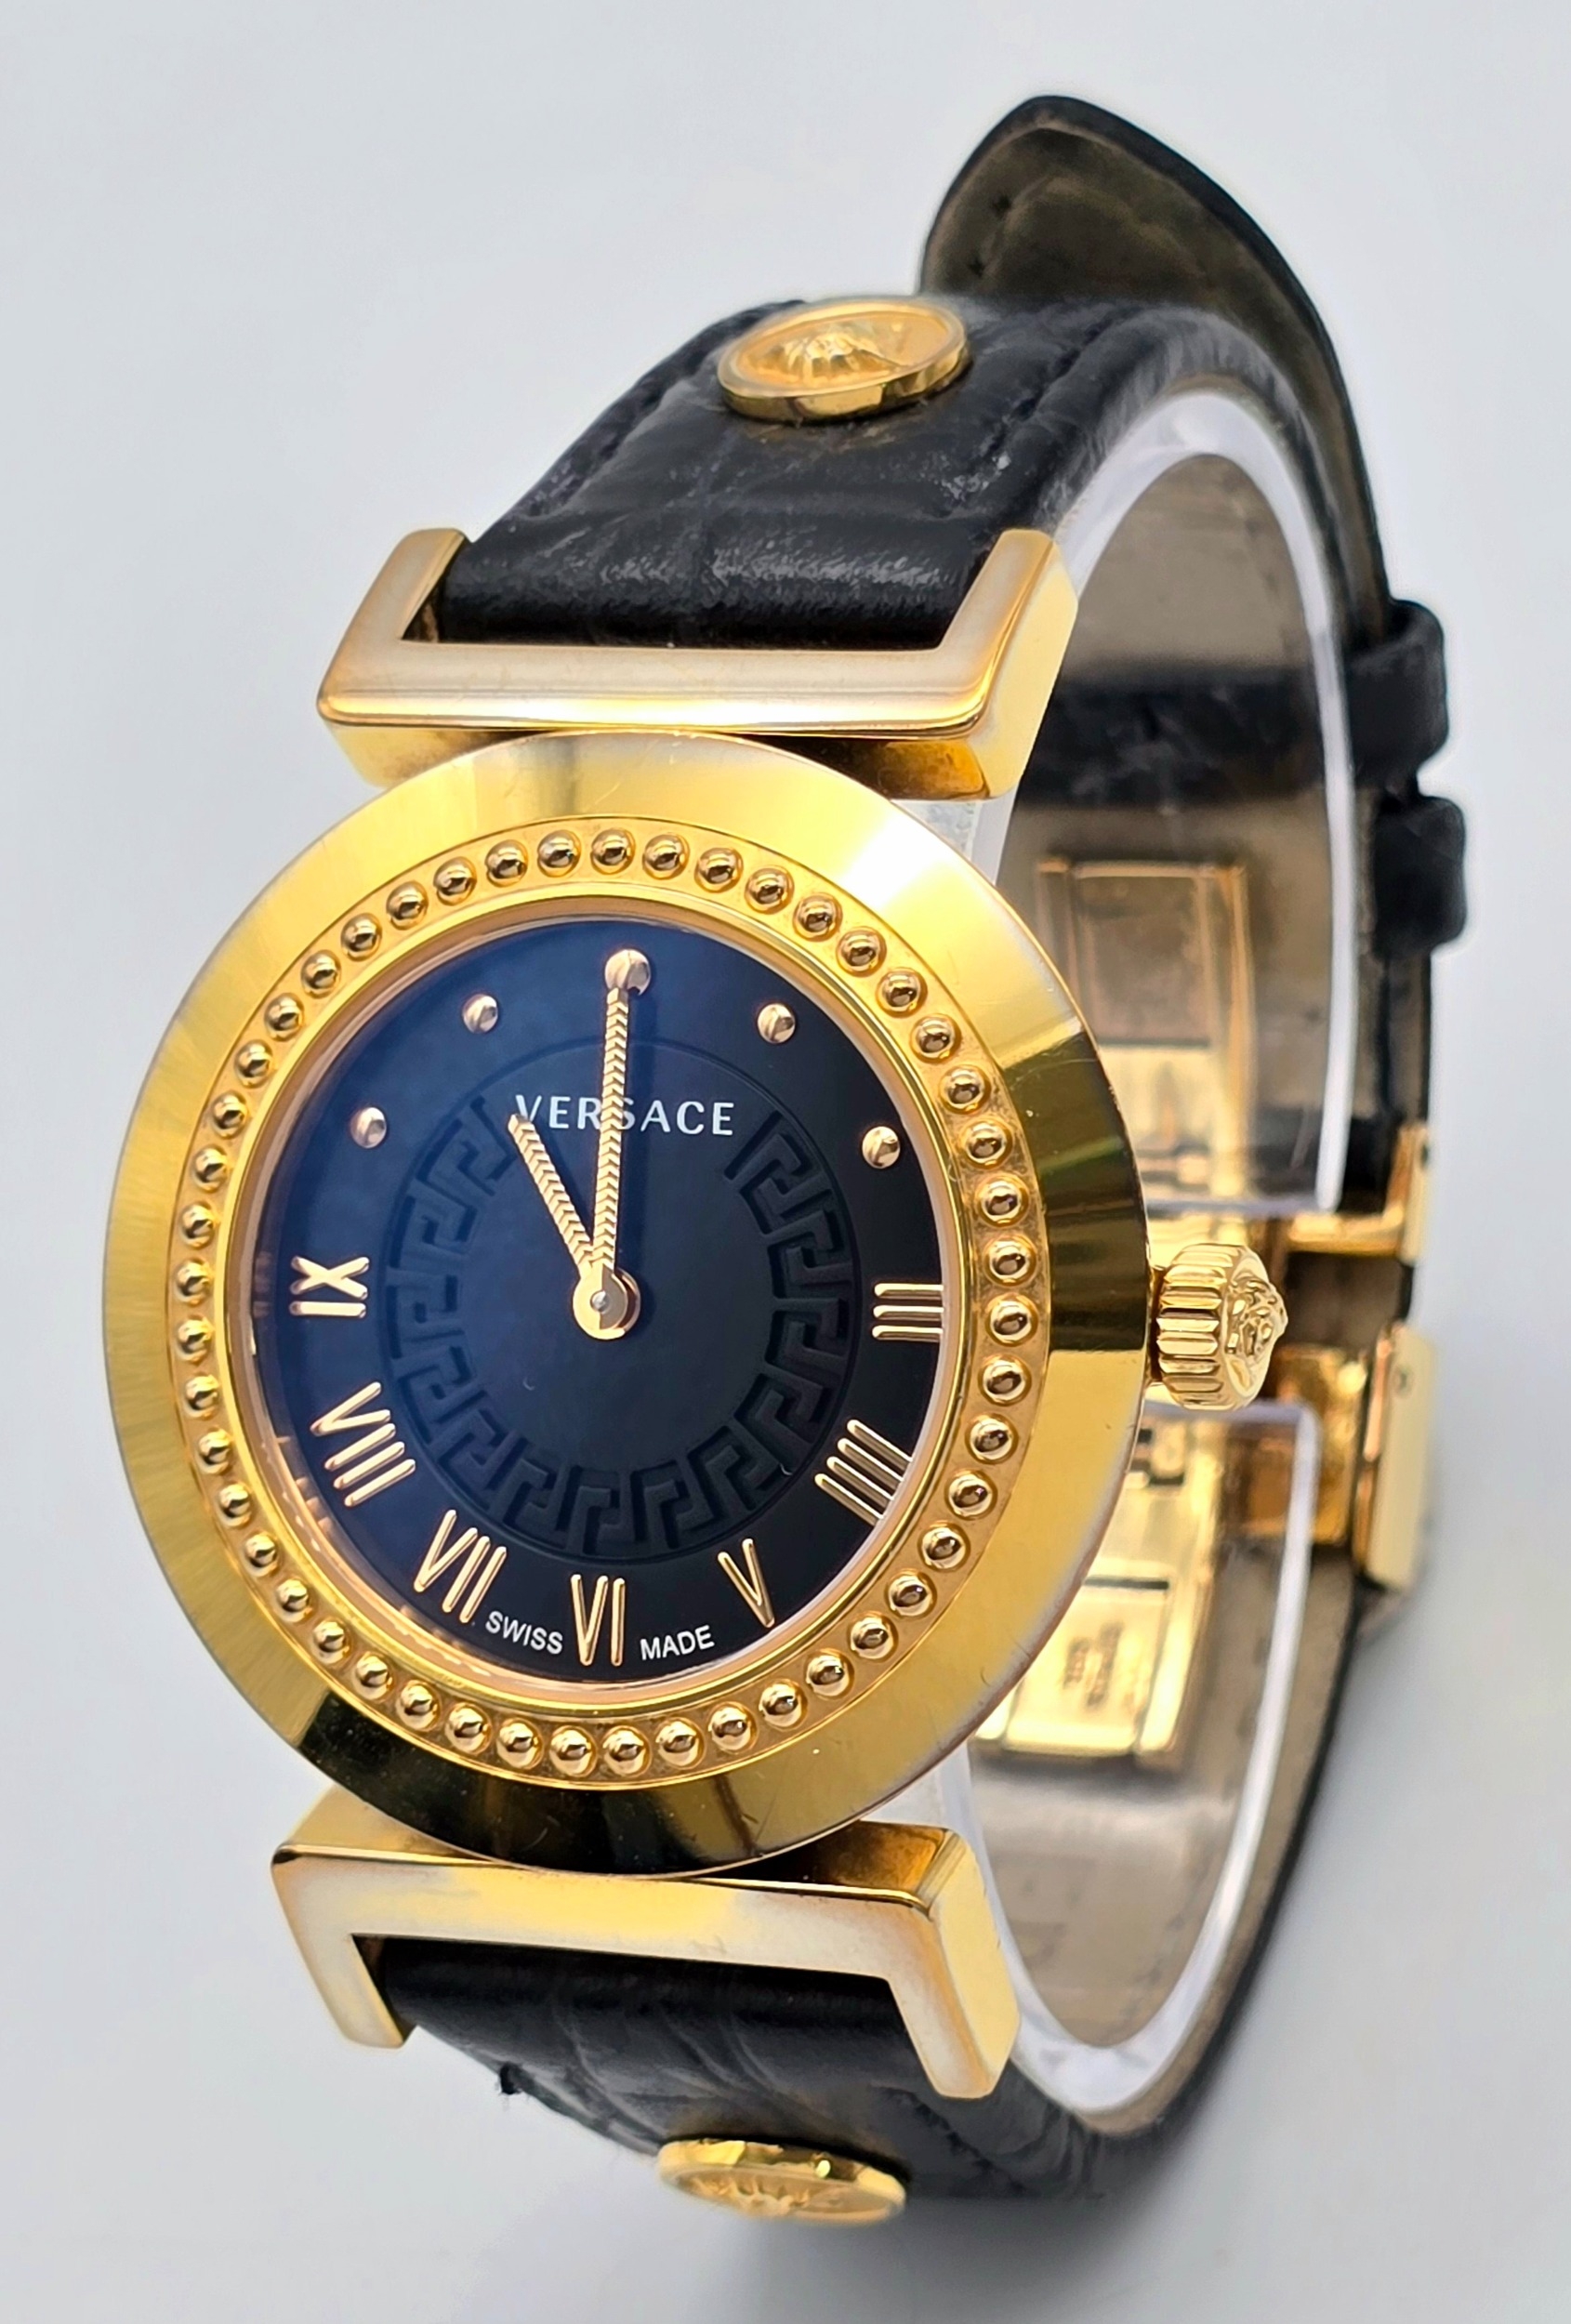 A Versace Designer Quartz Ladies Watch. Black leather and gilded strap and case - 35mm. Black dial